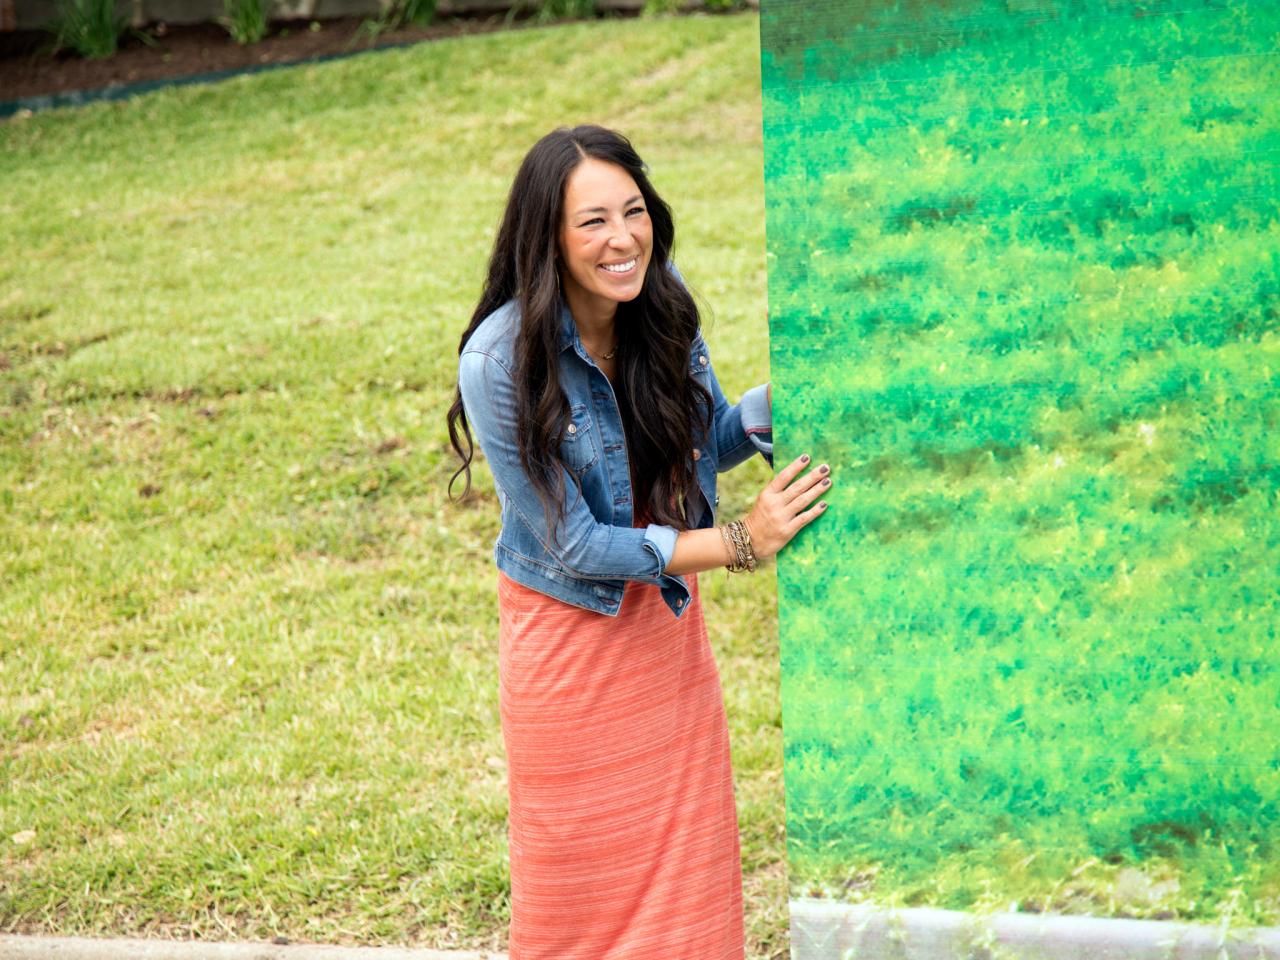 Joanna Gaines holds a canvas in a scene from Fixer Upper